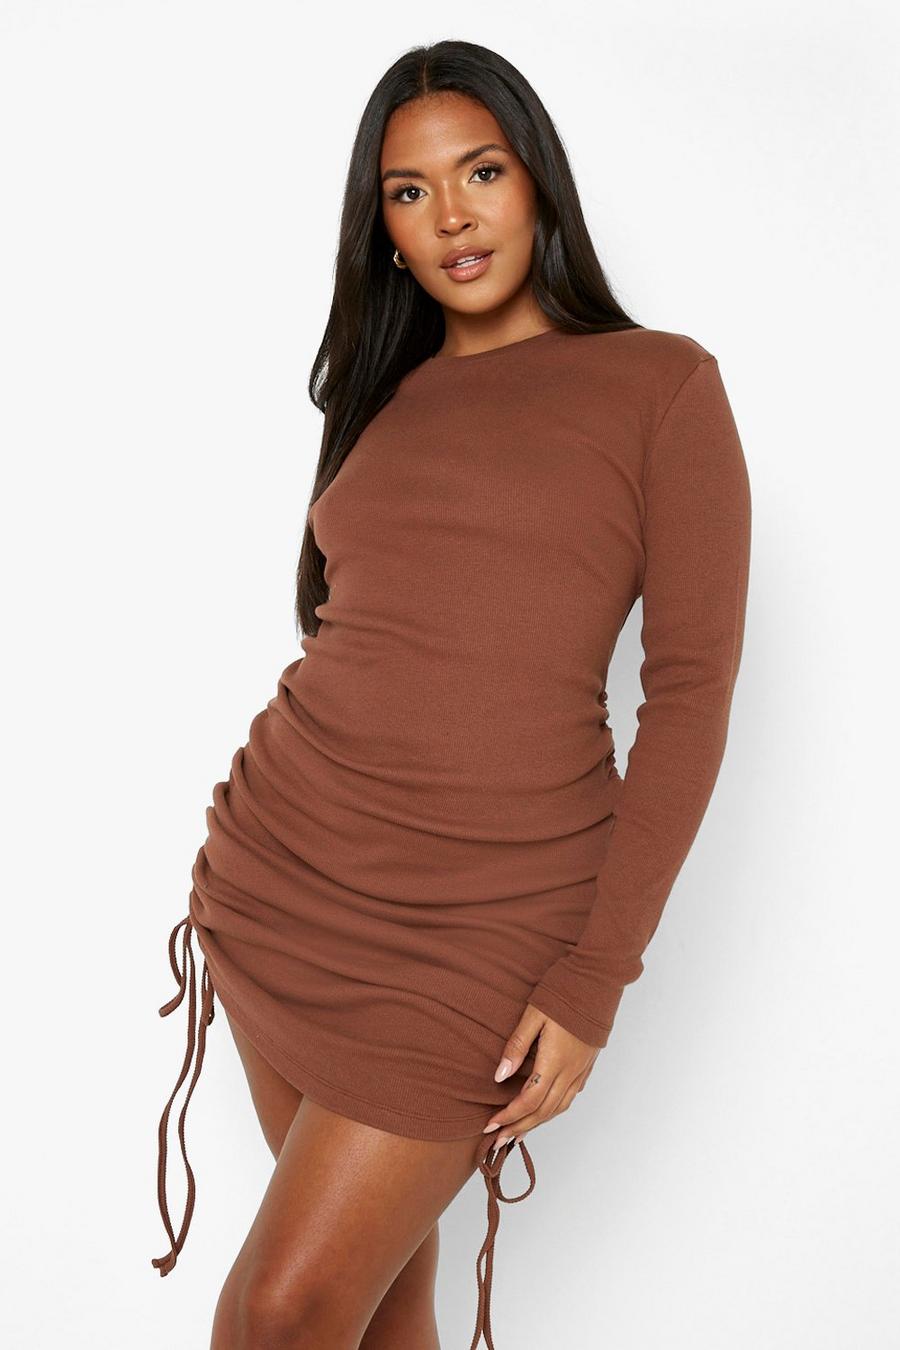 Trendy and Flattering Long Bodycon Skirts for Every Occasion